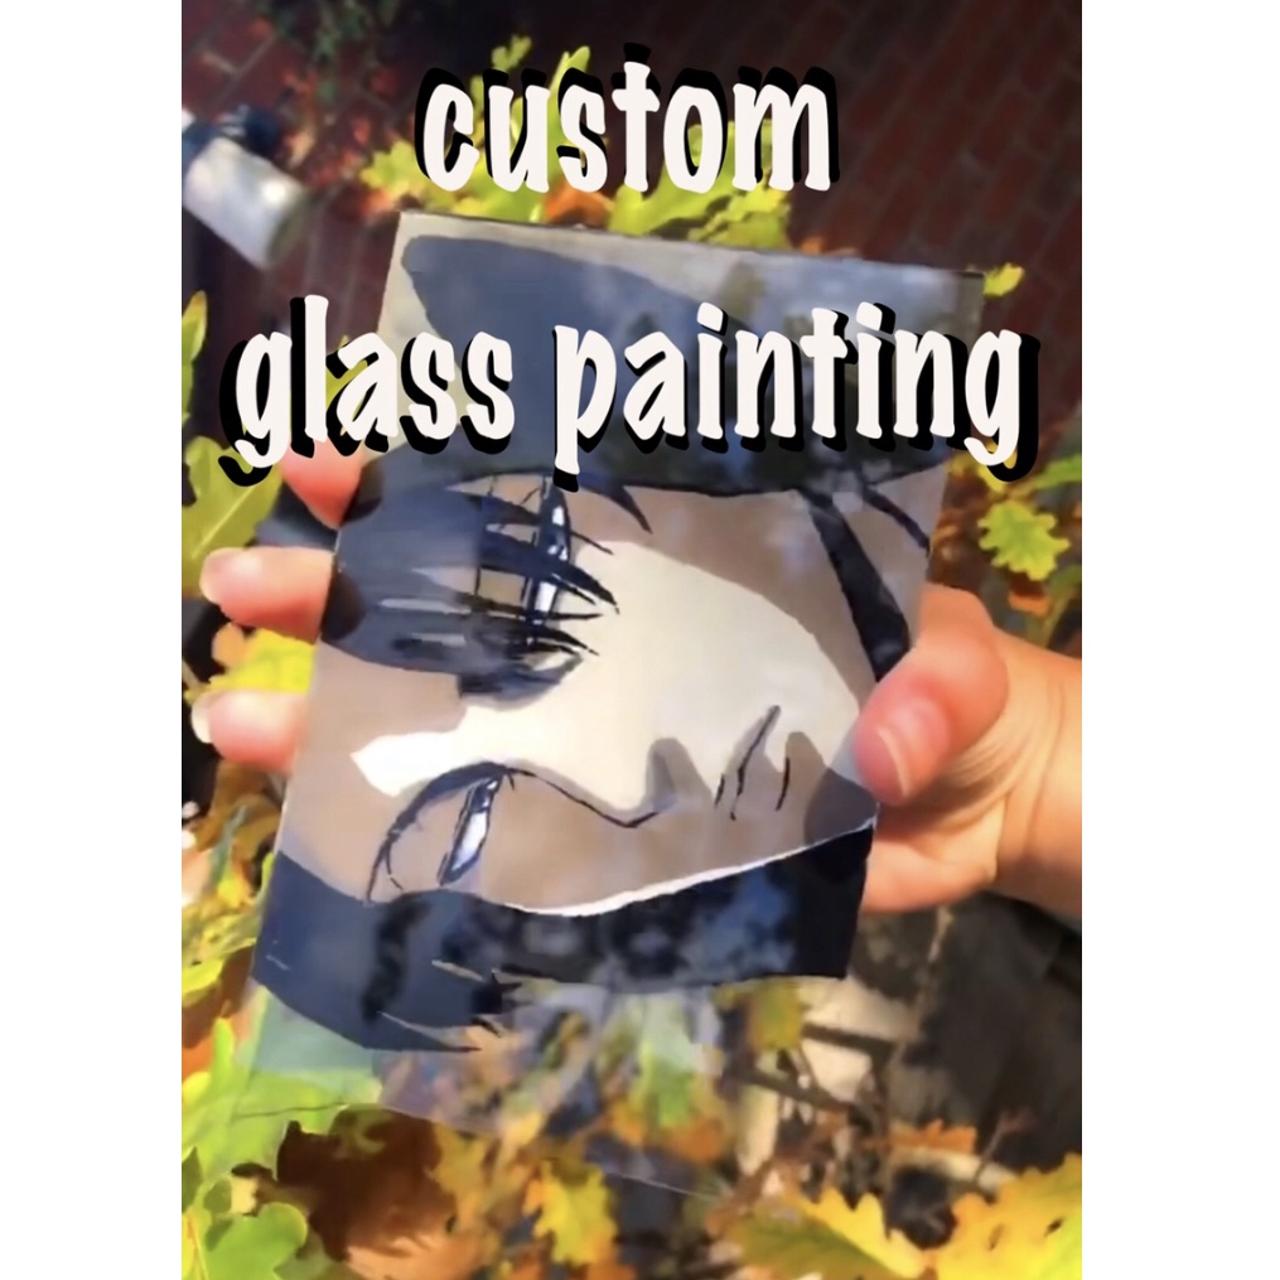 anime glass painting ♡🇲🇾 // 𝖘𝖍𝖔𝖓𝖊𝖓.𝖈𝖔 on X: 